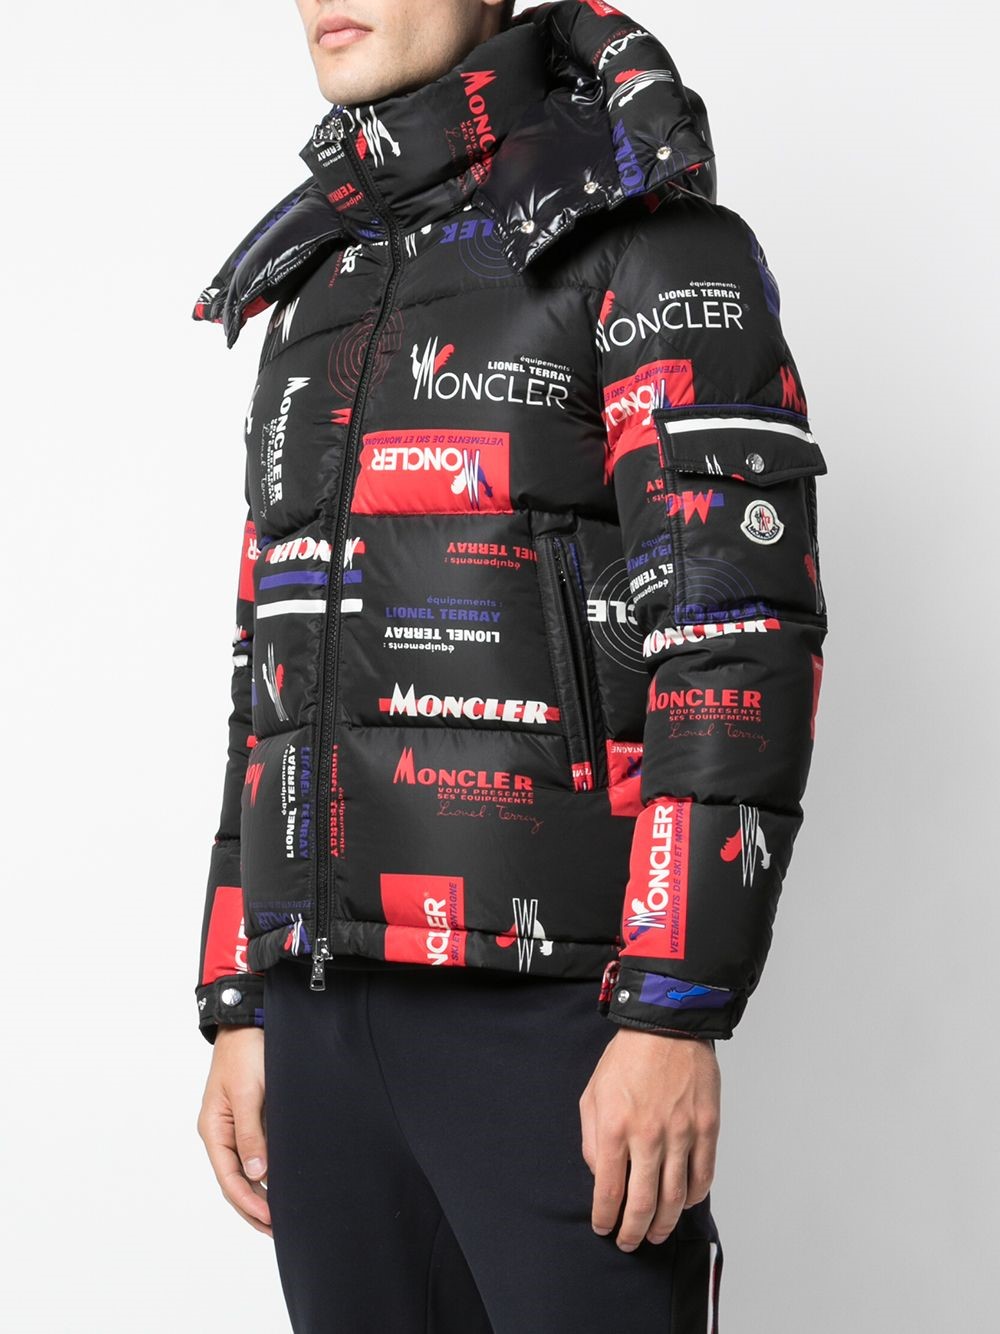 moncler WILSON JACKET available on montiboutique.com - 31489